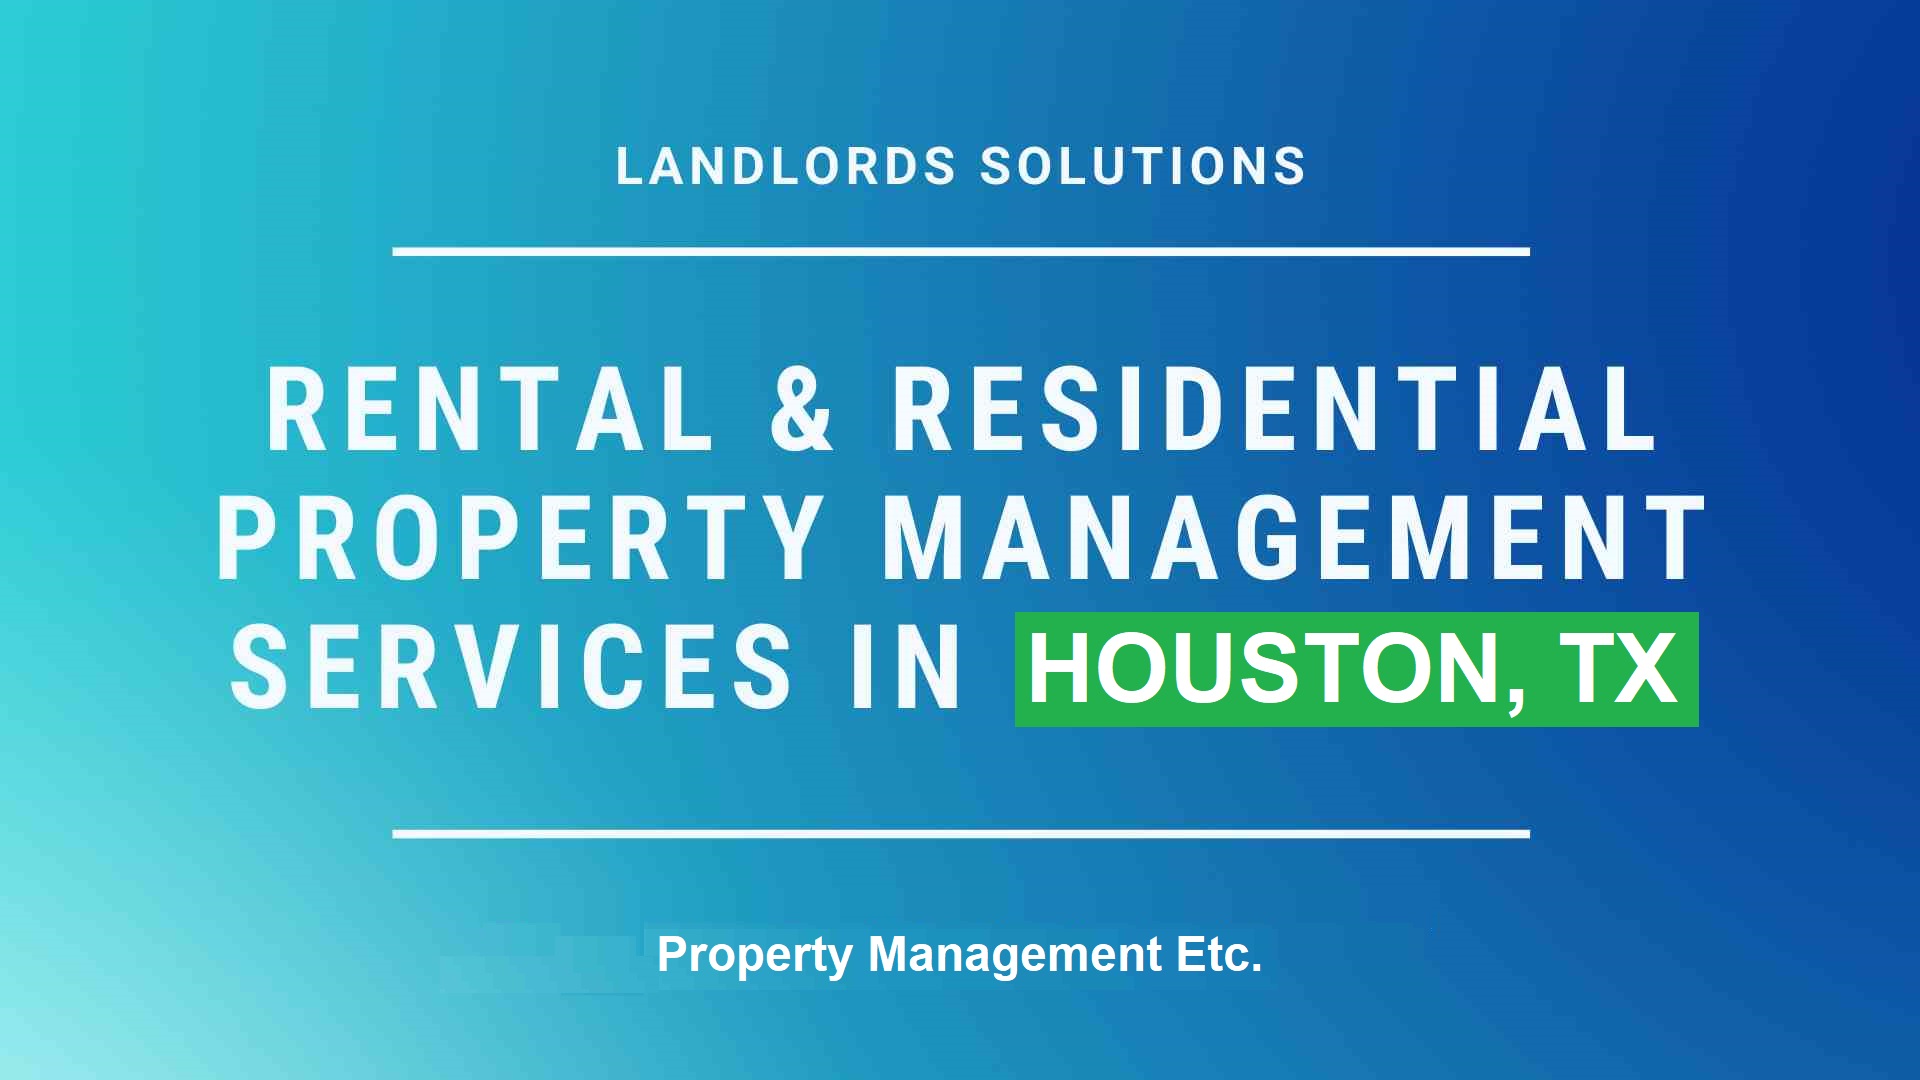 Rental-residential-property-management-services-in-Houston